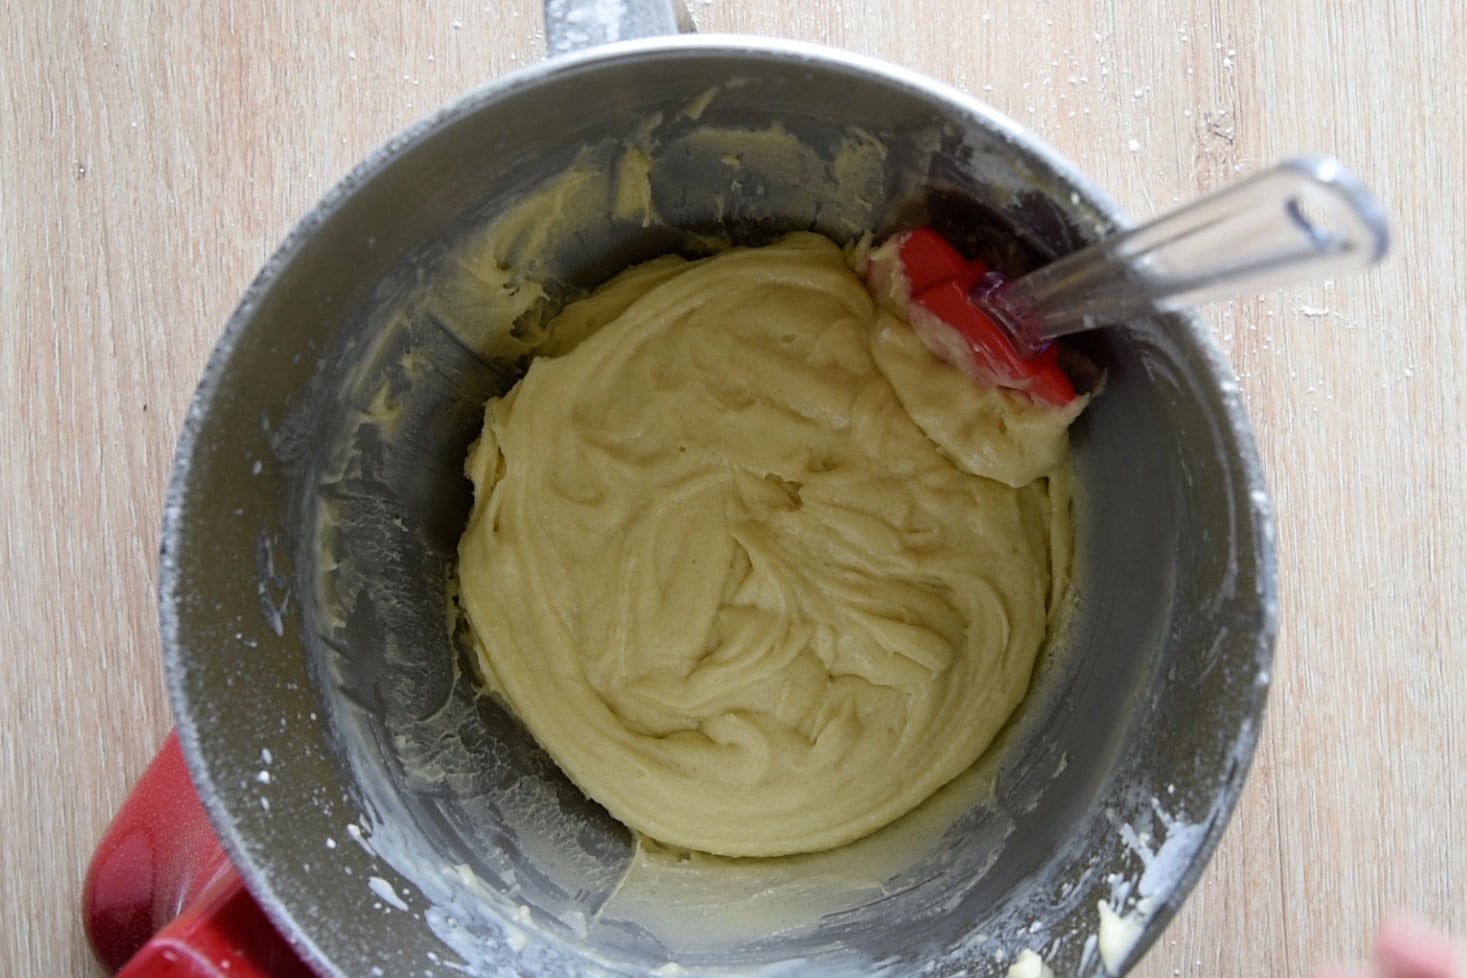 the base batter in the mixer bowl